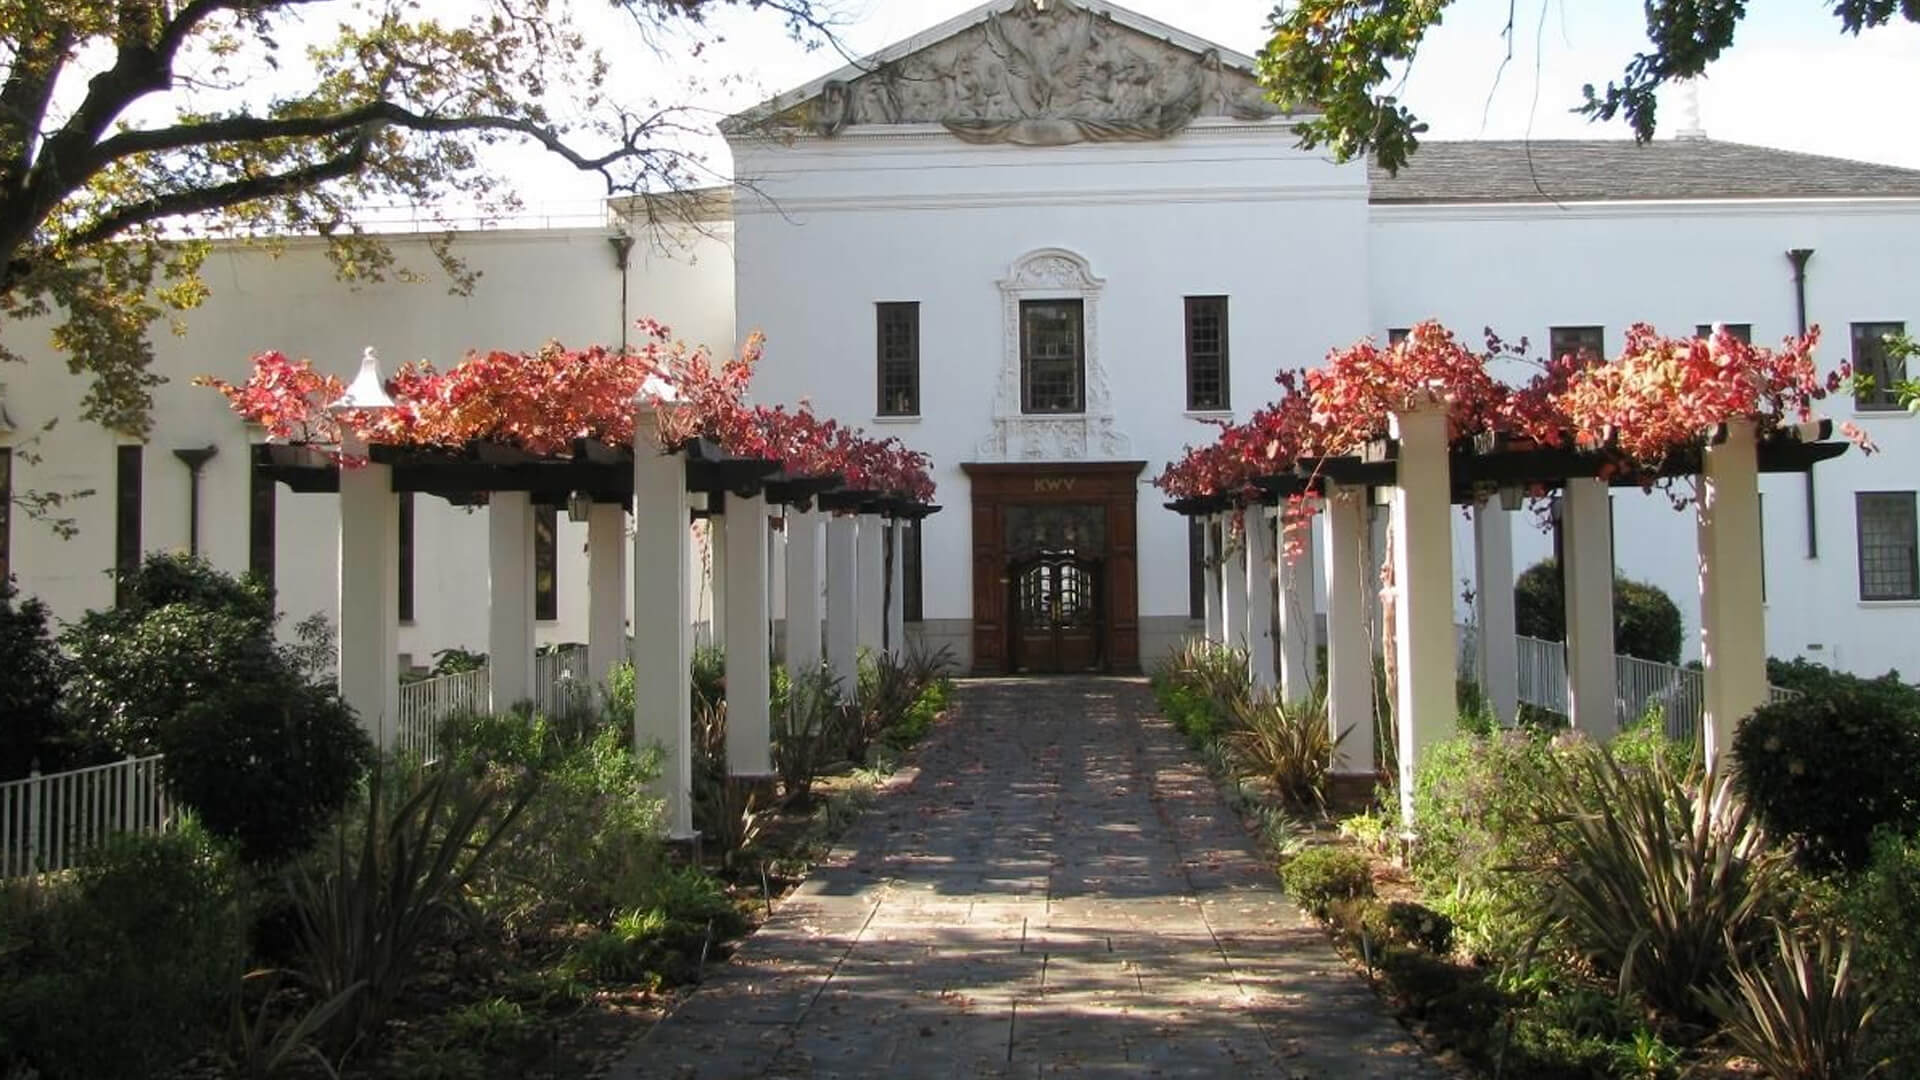 KWV Distillery - Cape Town, South Africa